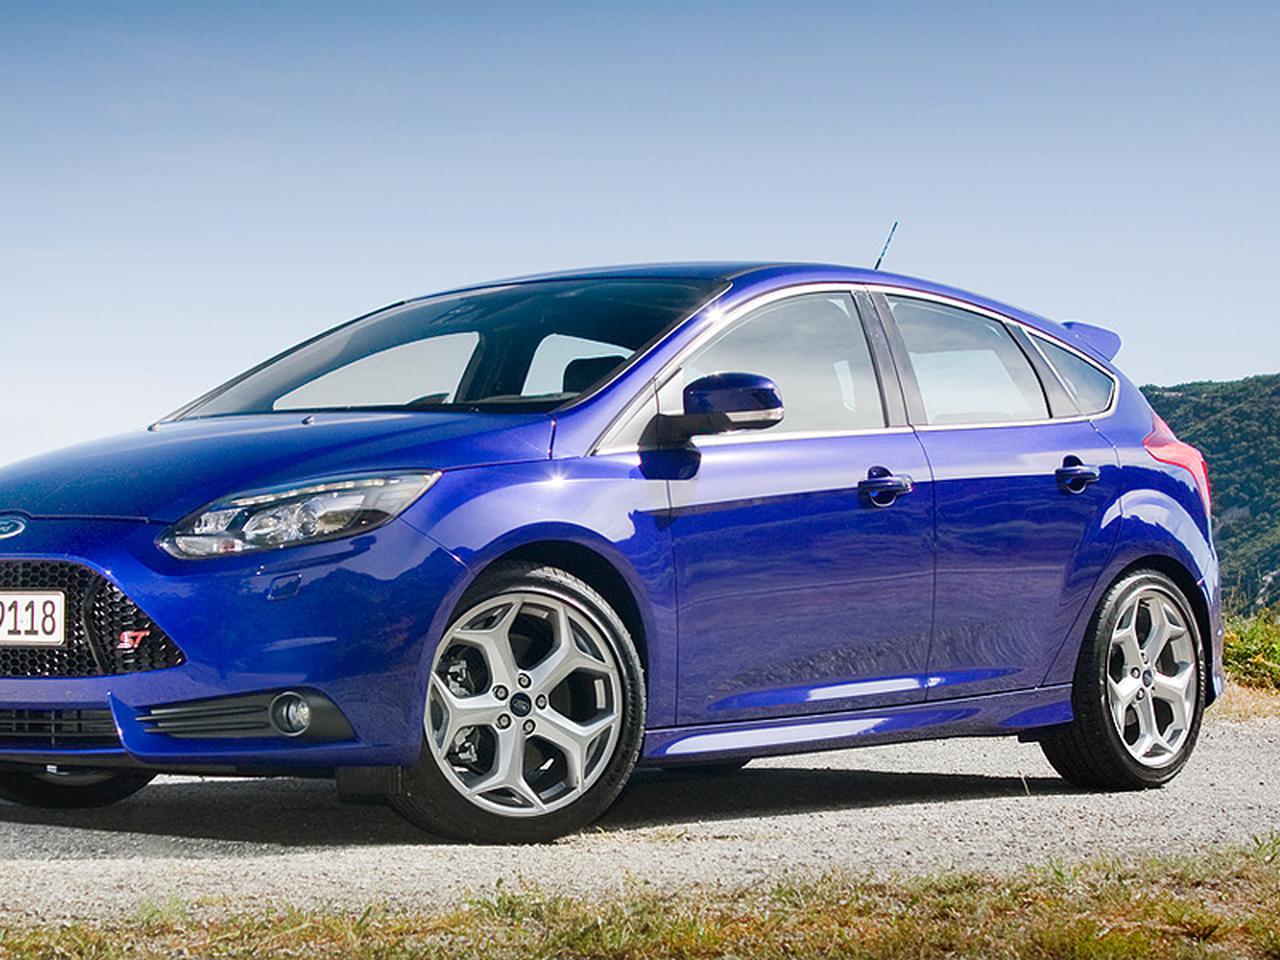 Форд фокус 125 лс. Ford Focus 2011. Ford Focus 3. Ford Focus 3 поколение. Форд фокус 302.